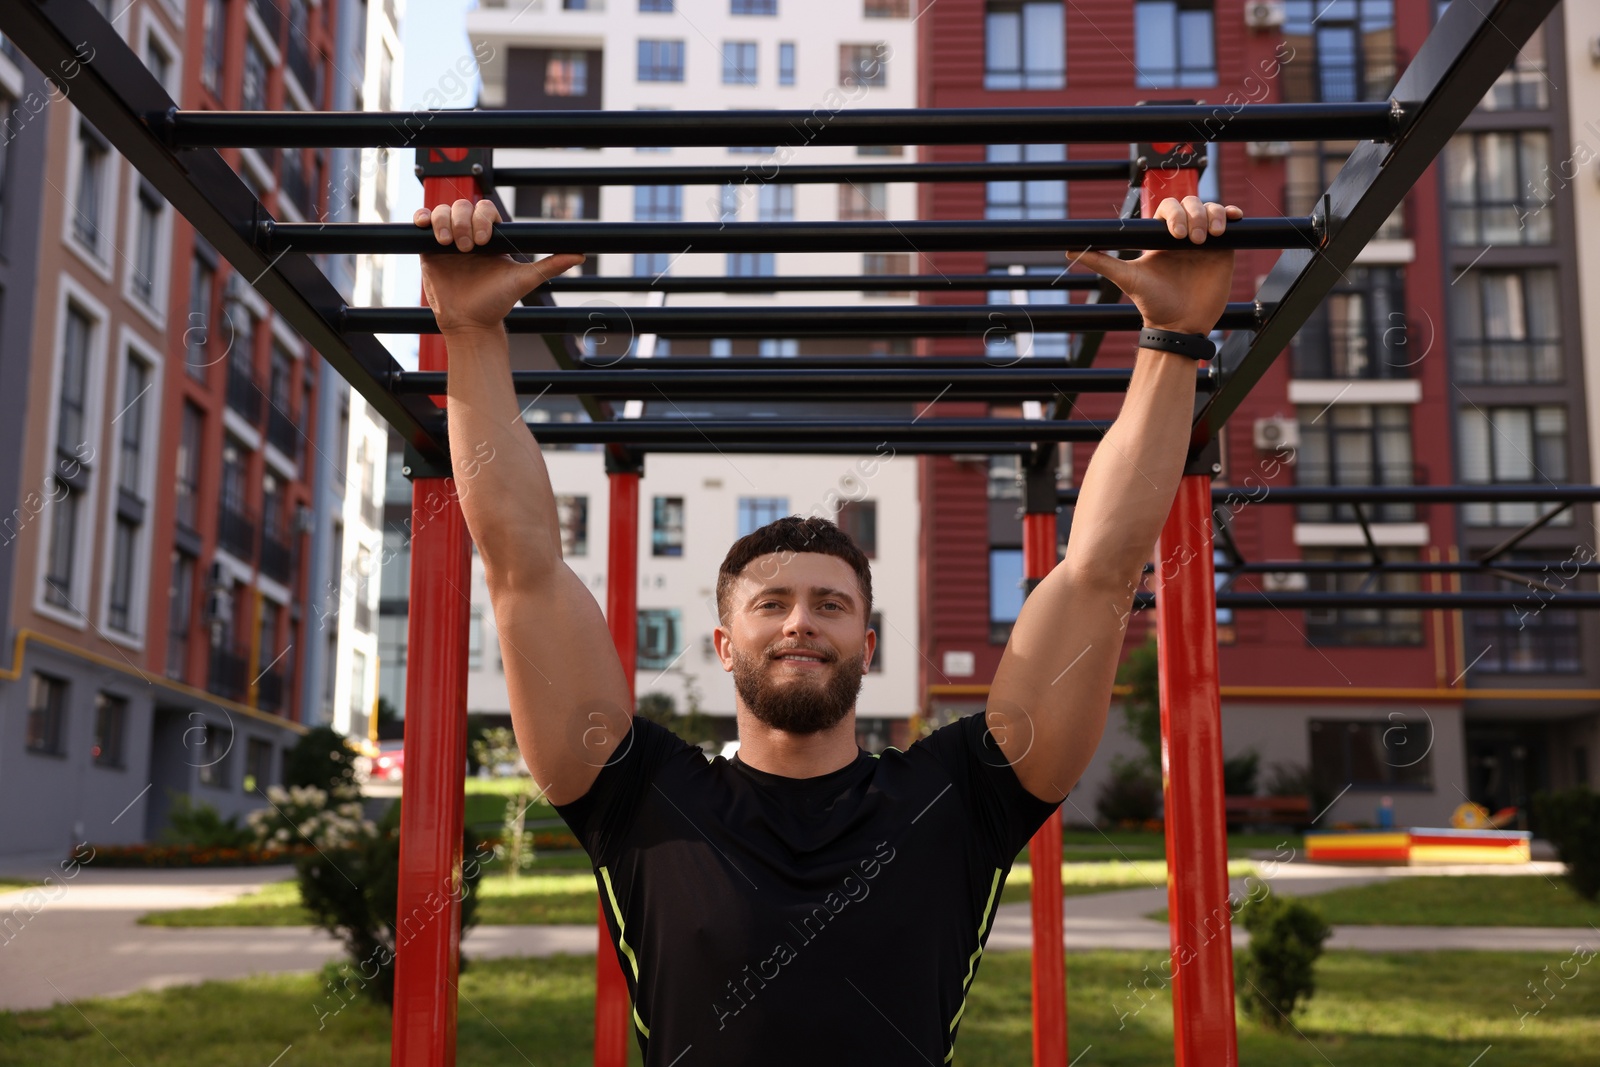 Photo of Smiling man training on monkey bars at outdoor gym